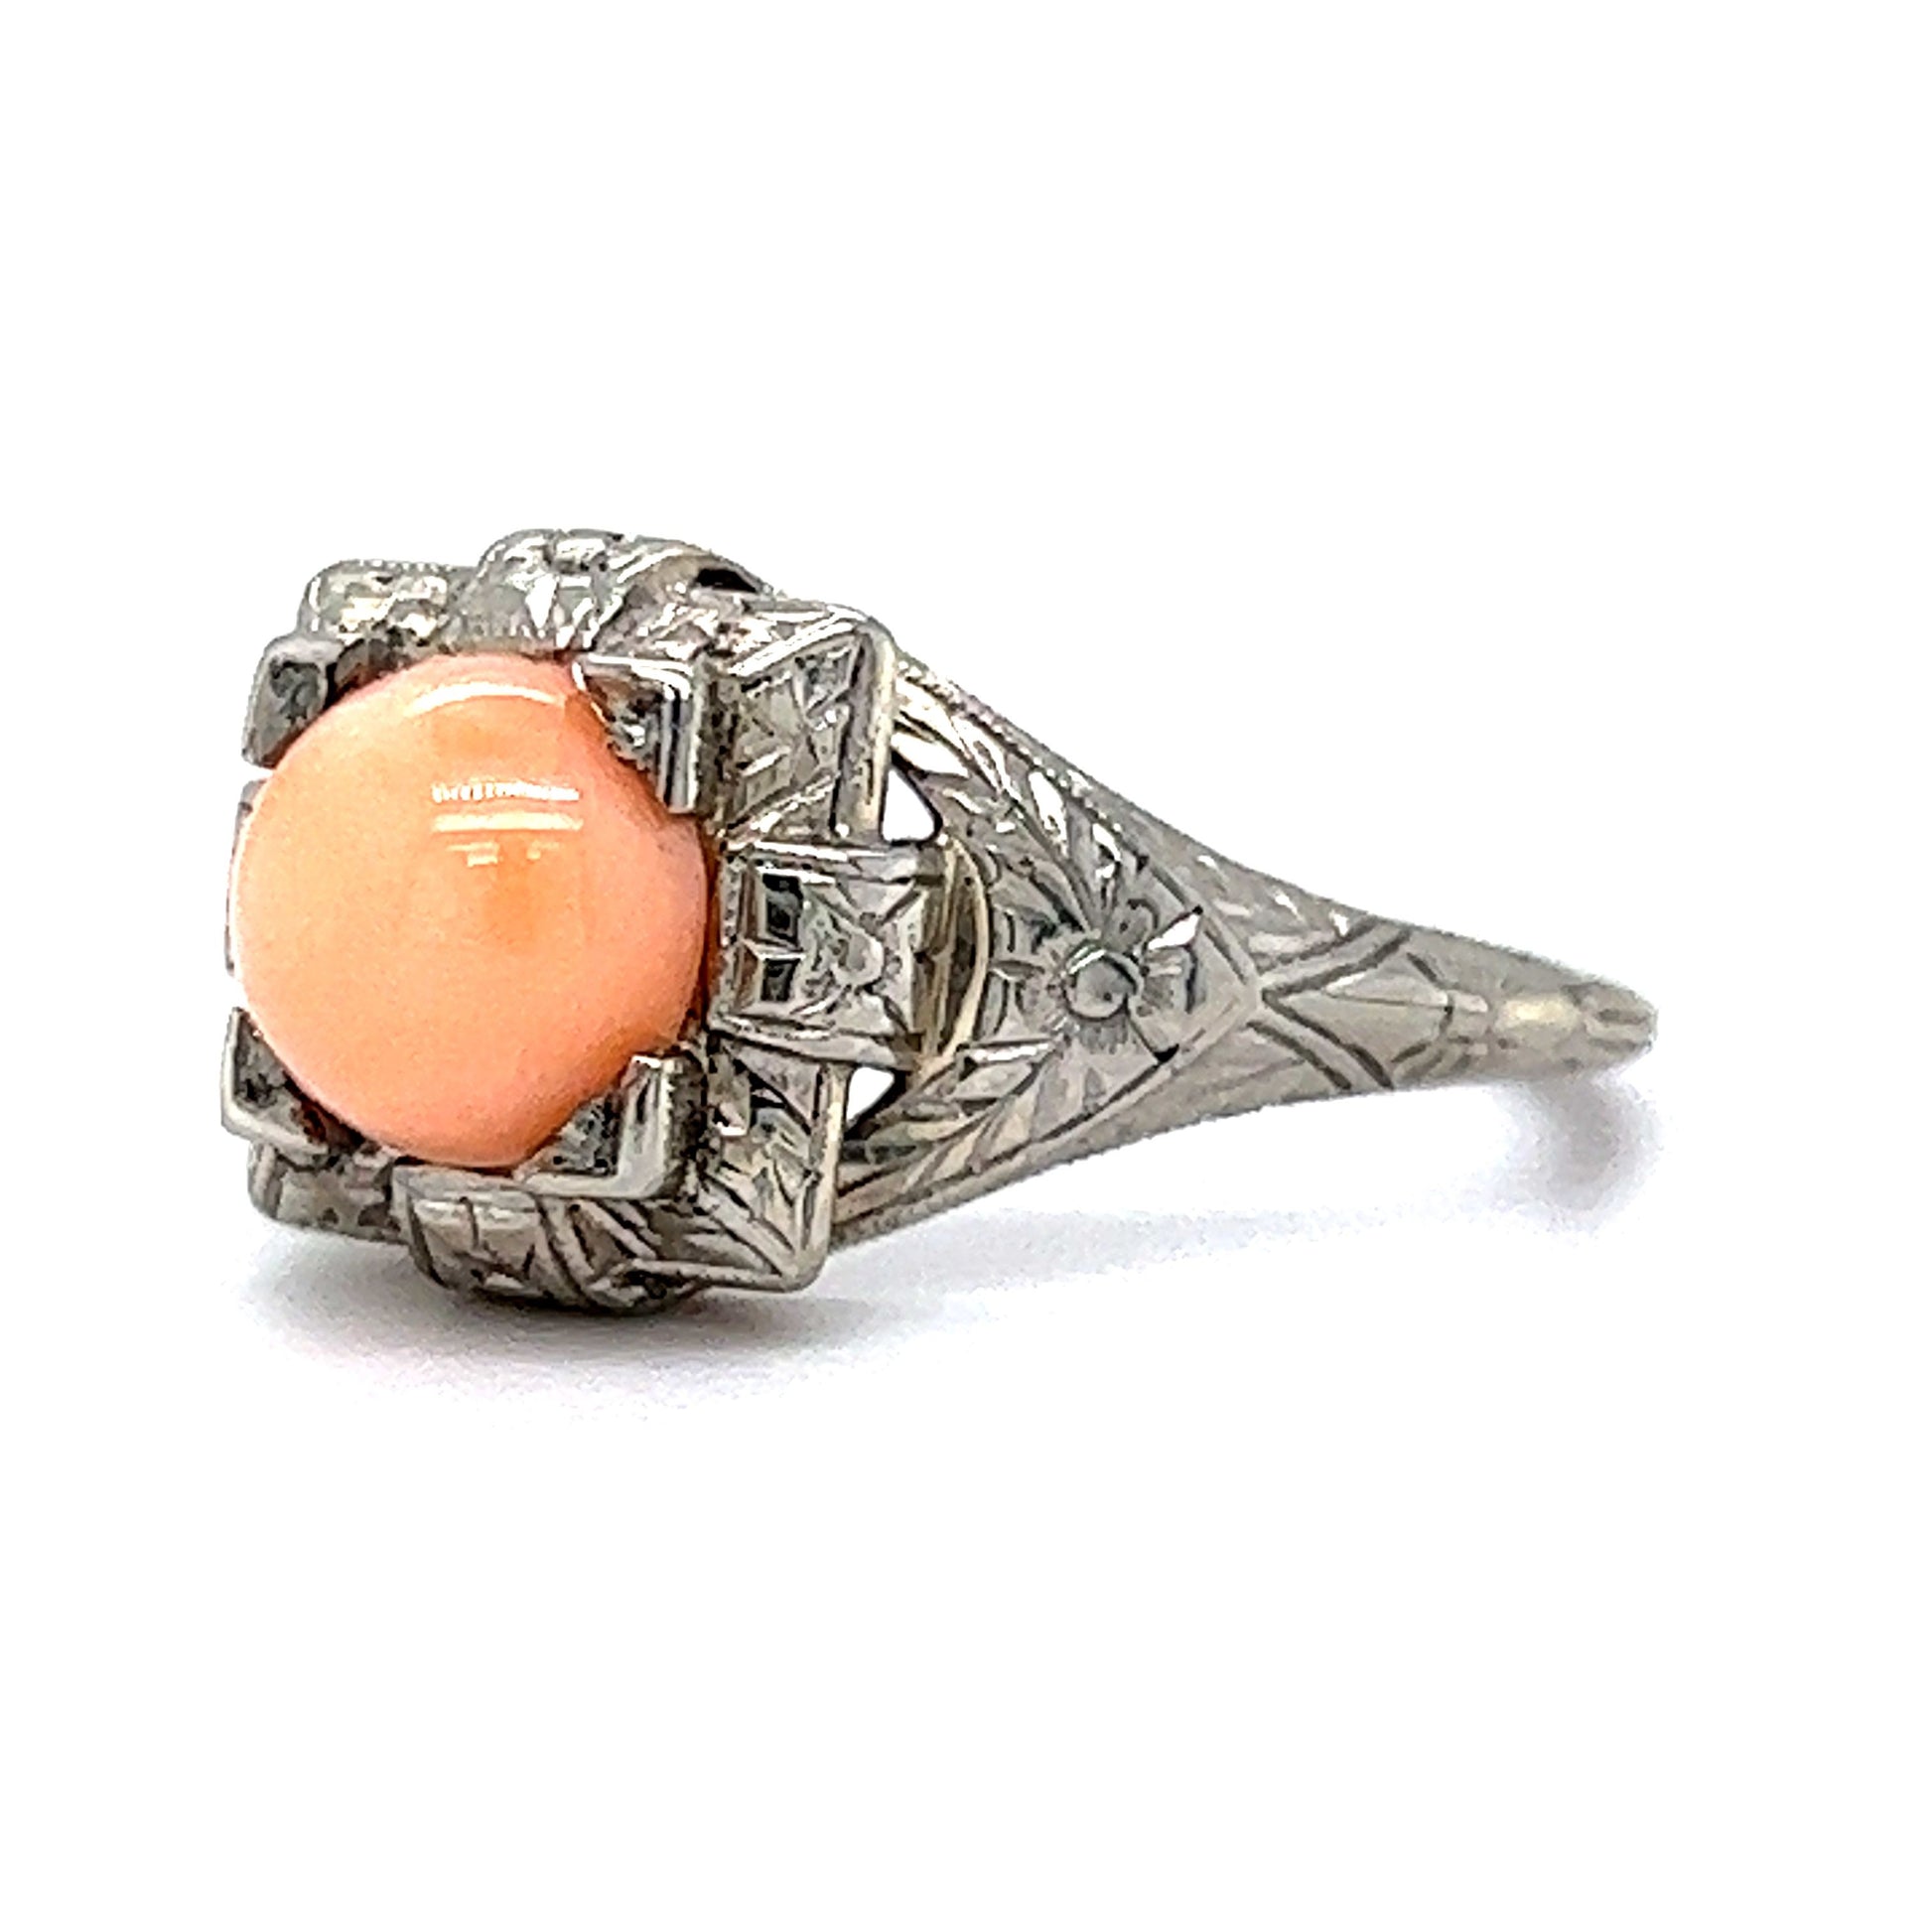 Antique Art Deco Cabochon Cut Coral Cocktail Ring in 18k White Gold